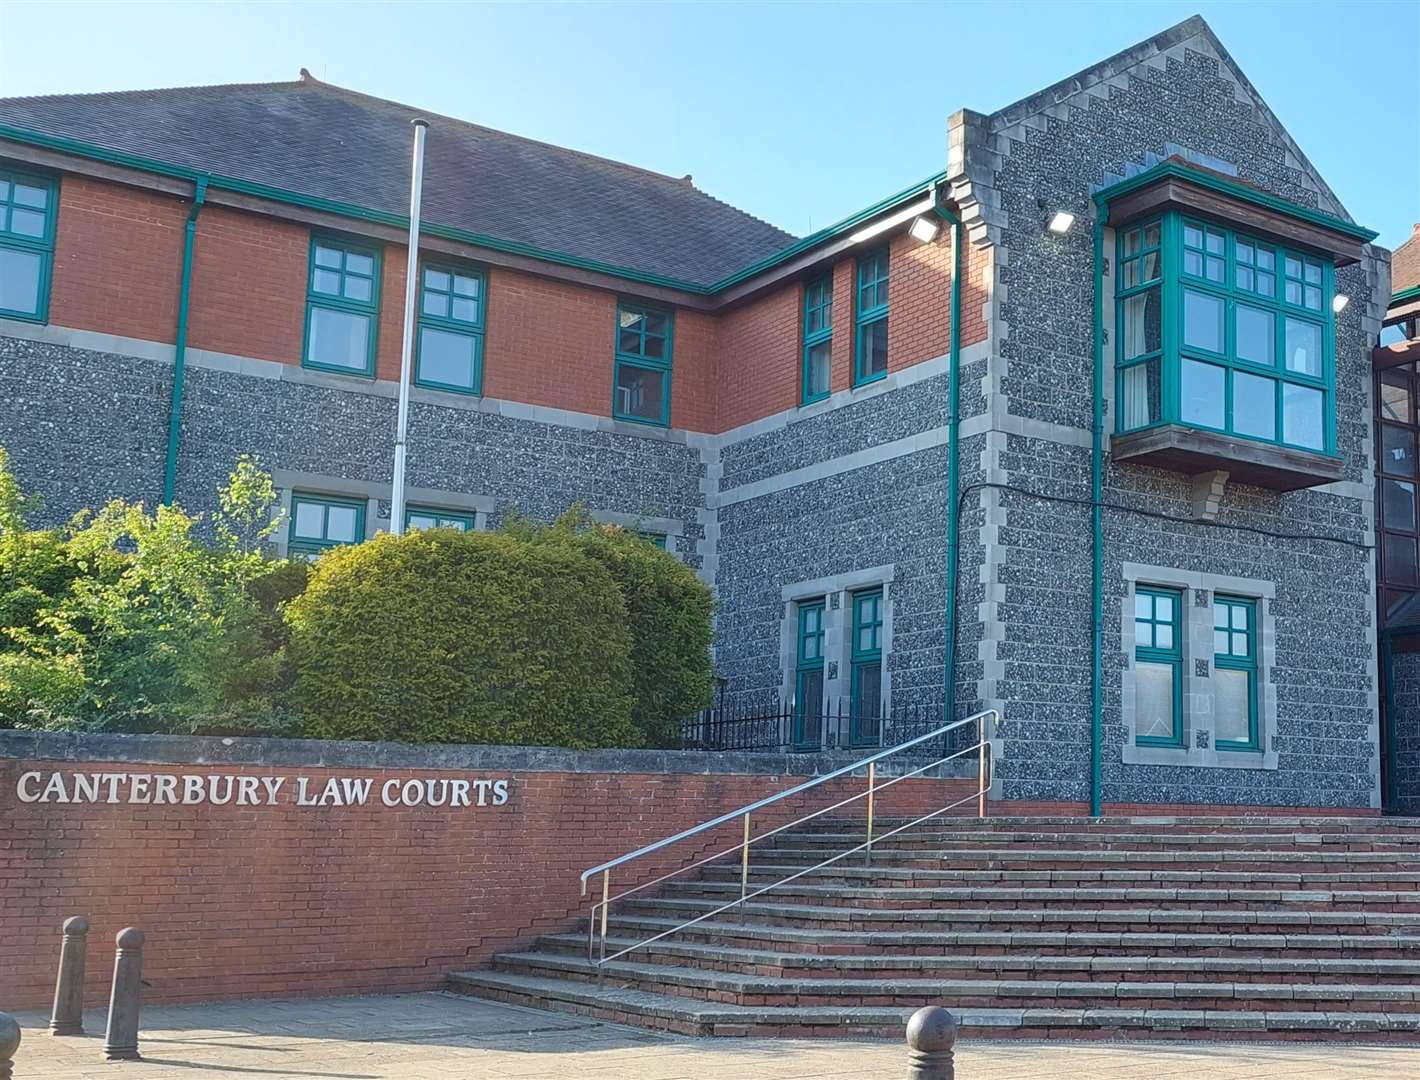 The sentencing took place at Canterbury Crown Court